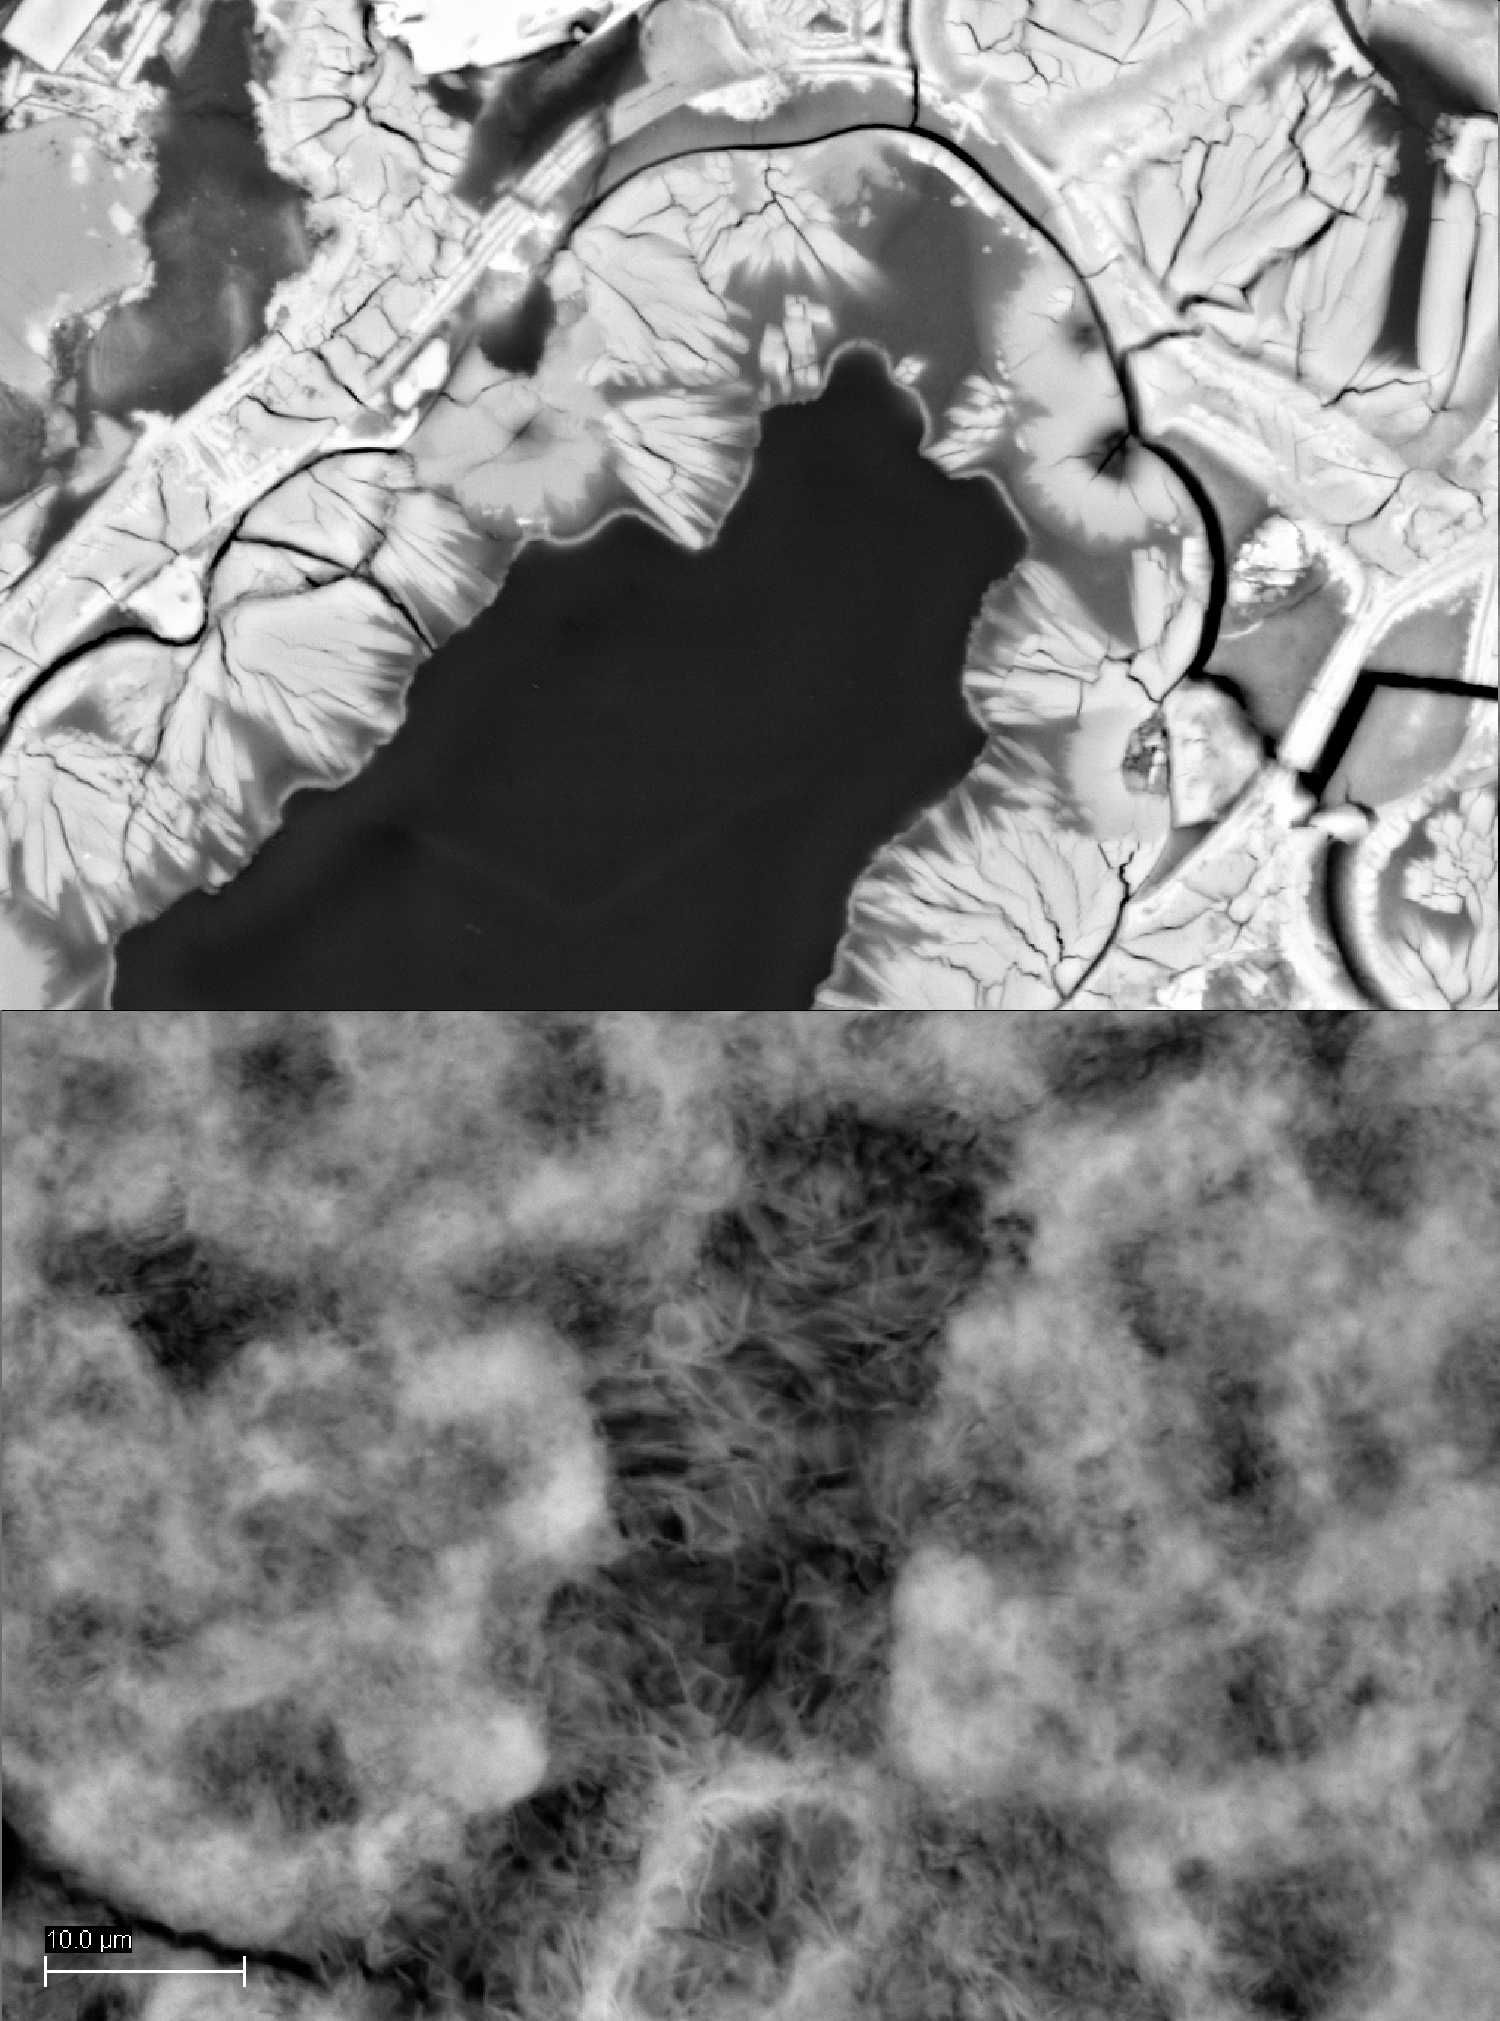 B&W closeups of pumice clast (top) and lime clast